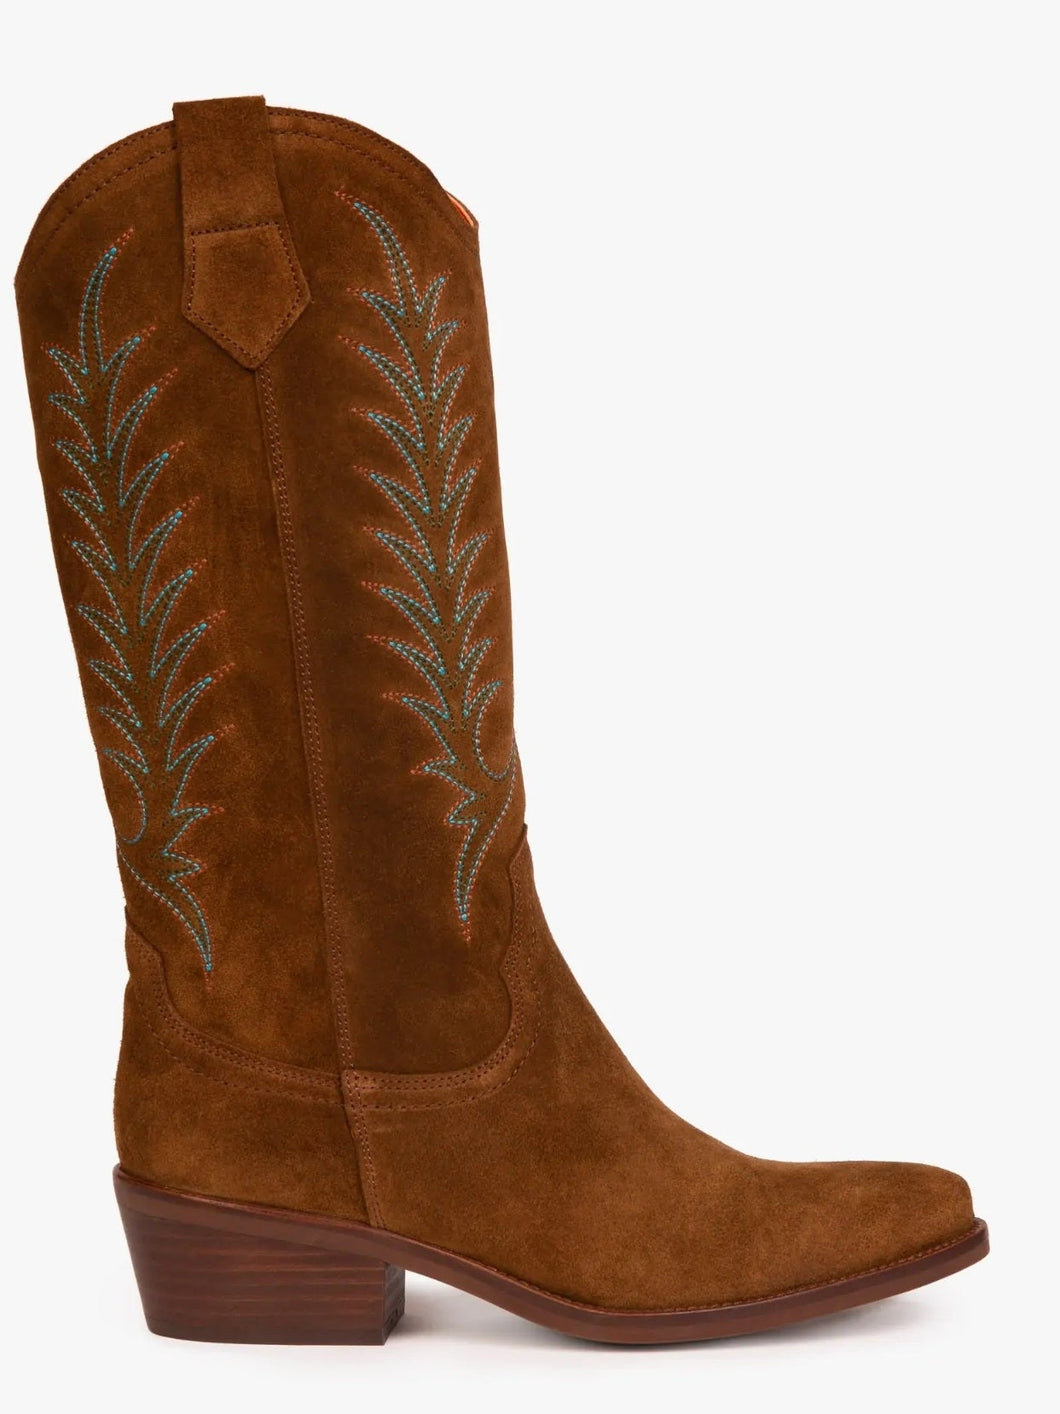 40% OFF - PENELOPE CHILVERS Goldie Embroidered Cowboy Boots - Ladies Suede - Peat - SIze: UK 8 (EU 42)